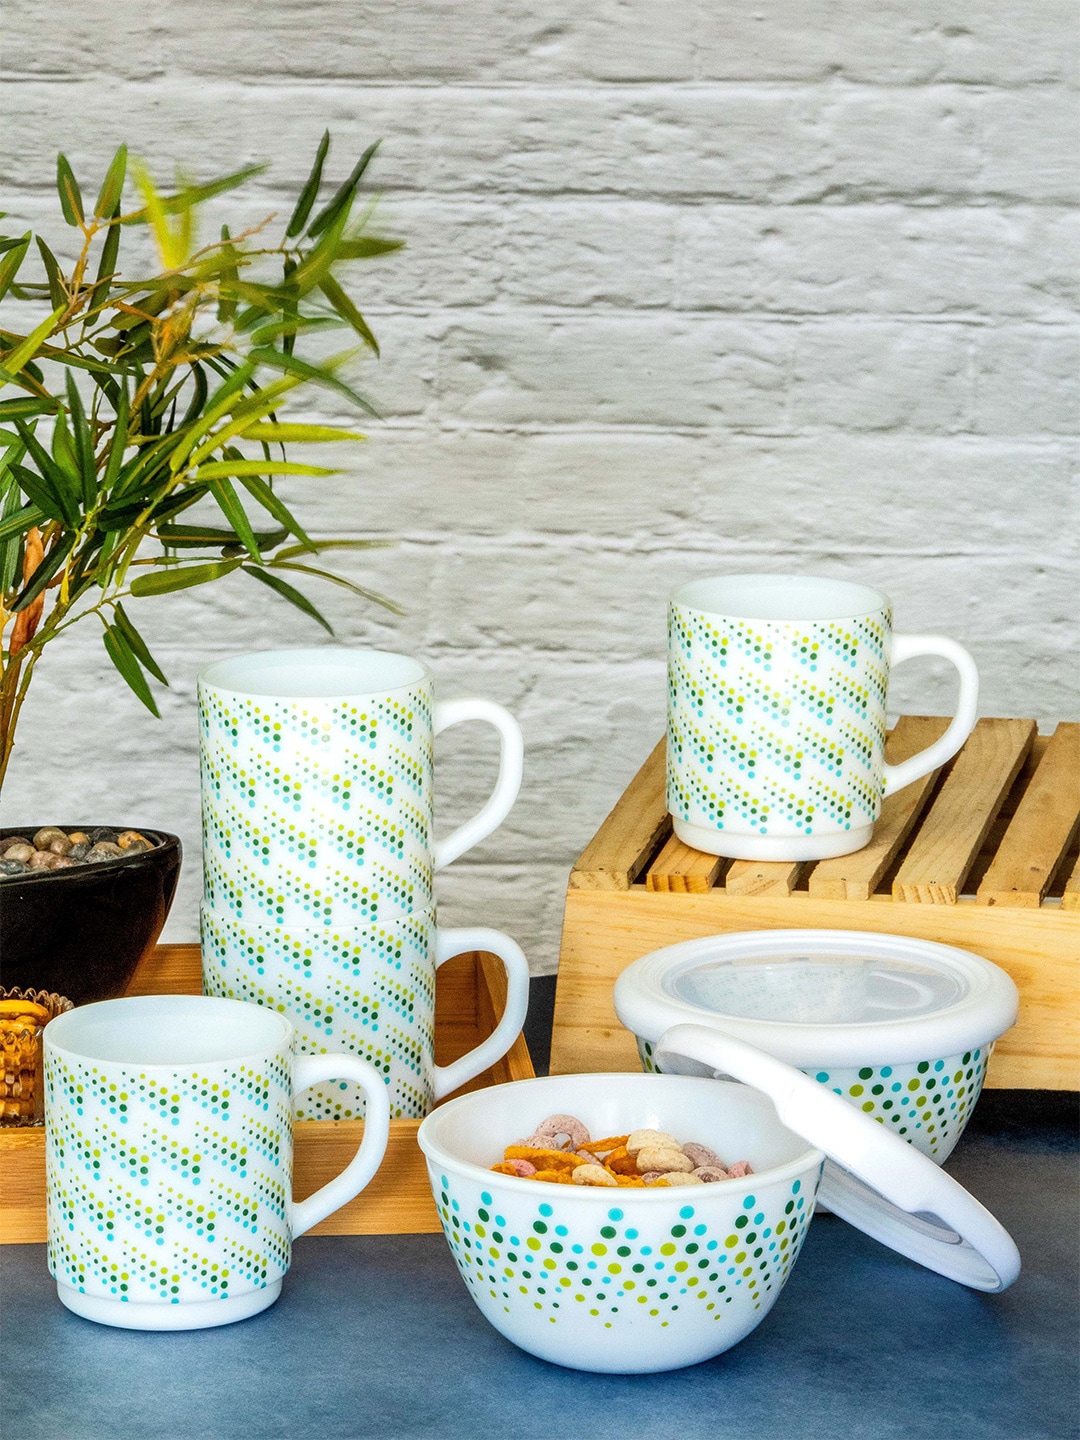 Cello White & Green Set of 4 Printed Opalware Glossy Mug & 2pcs Mixing Bowl with Lid Price in India